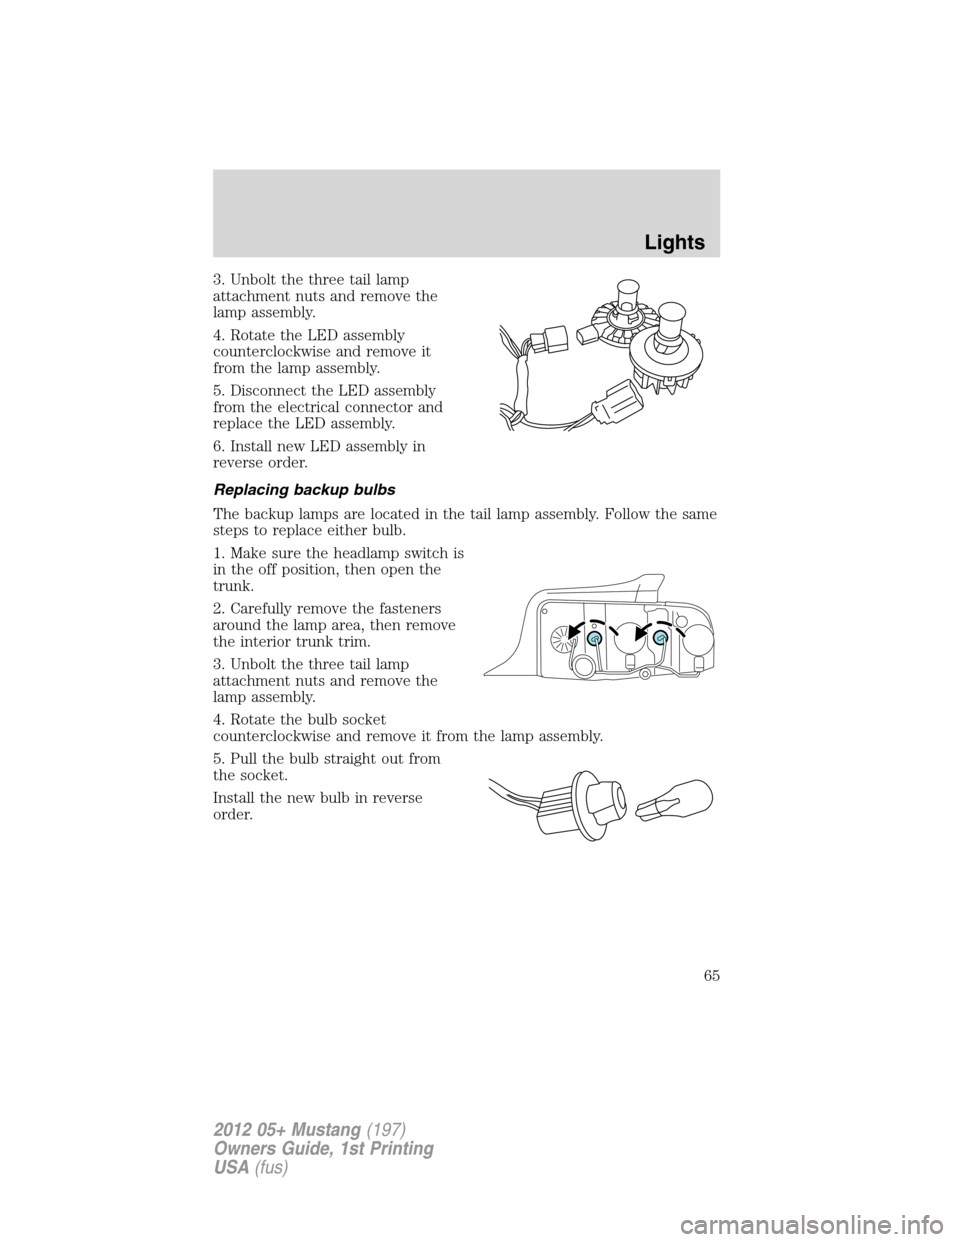 FORD MUSTANG 2012 5.G User Guide 3. Unbolt the three tail lamp
attachment nuts and remove the
lamp assembly.
4. Rotate the LED assembly
counterclockwise and remove it
from the lamp assembly.
5. Disconnect the LED assembly
from the el